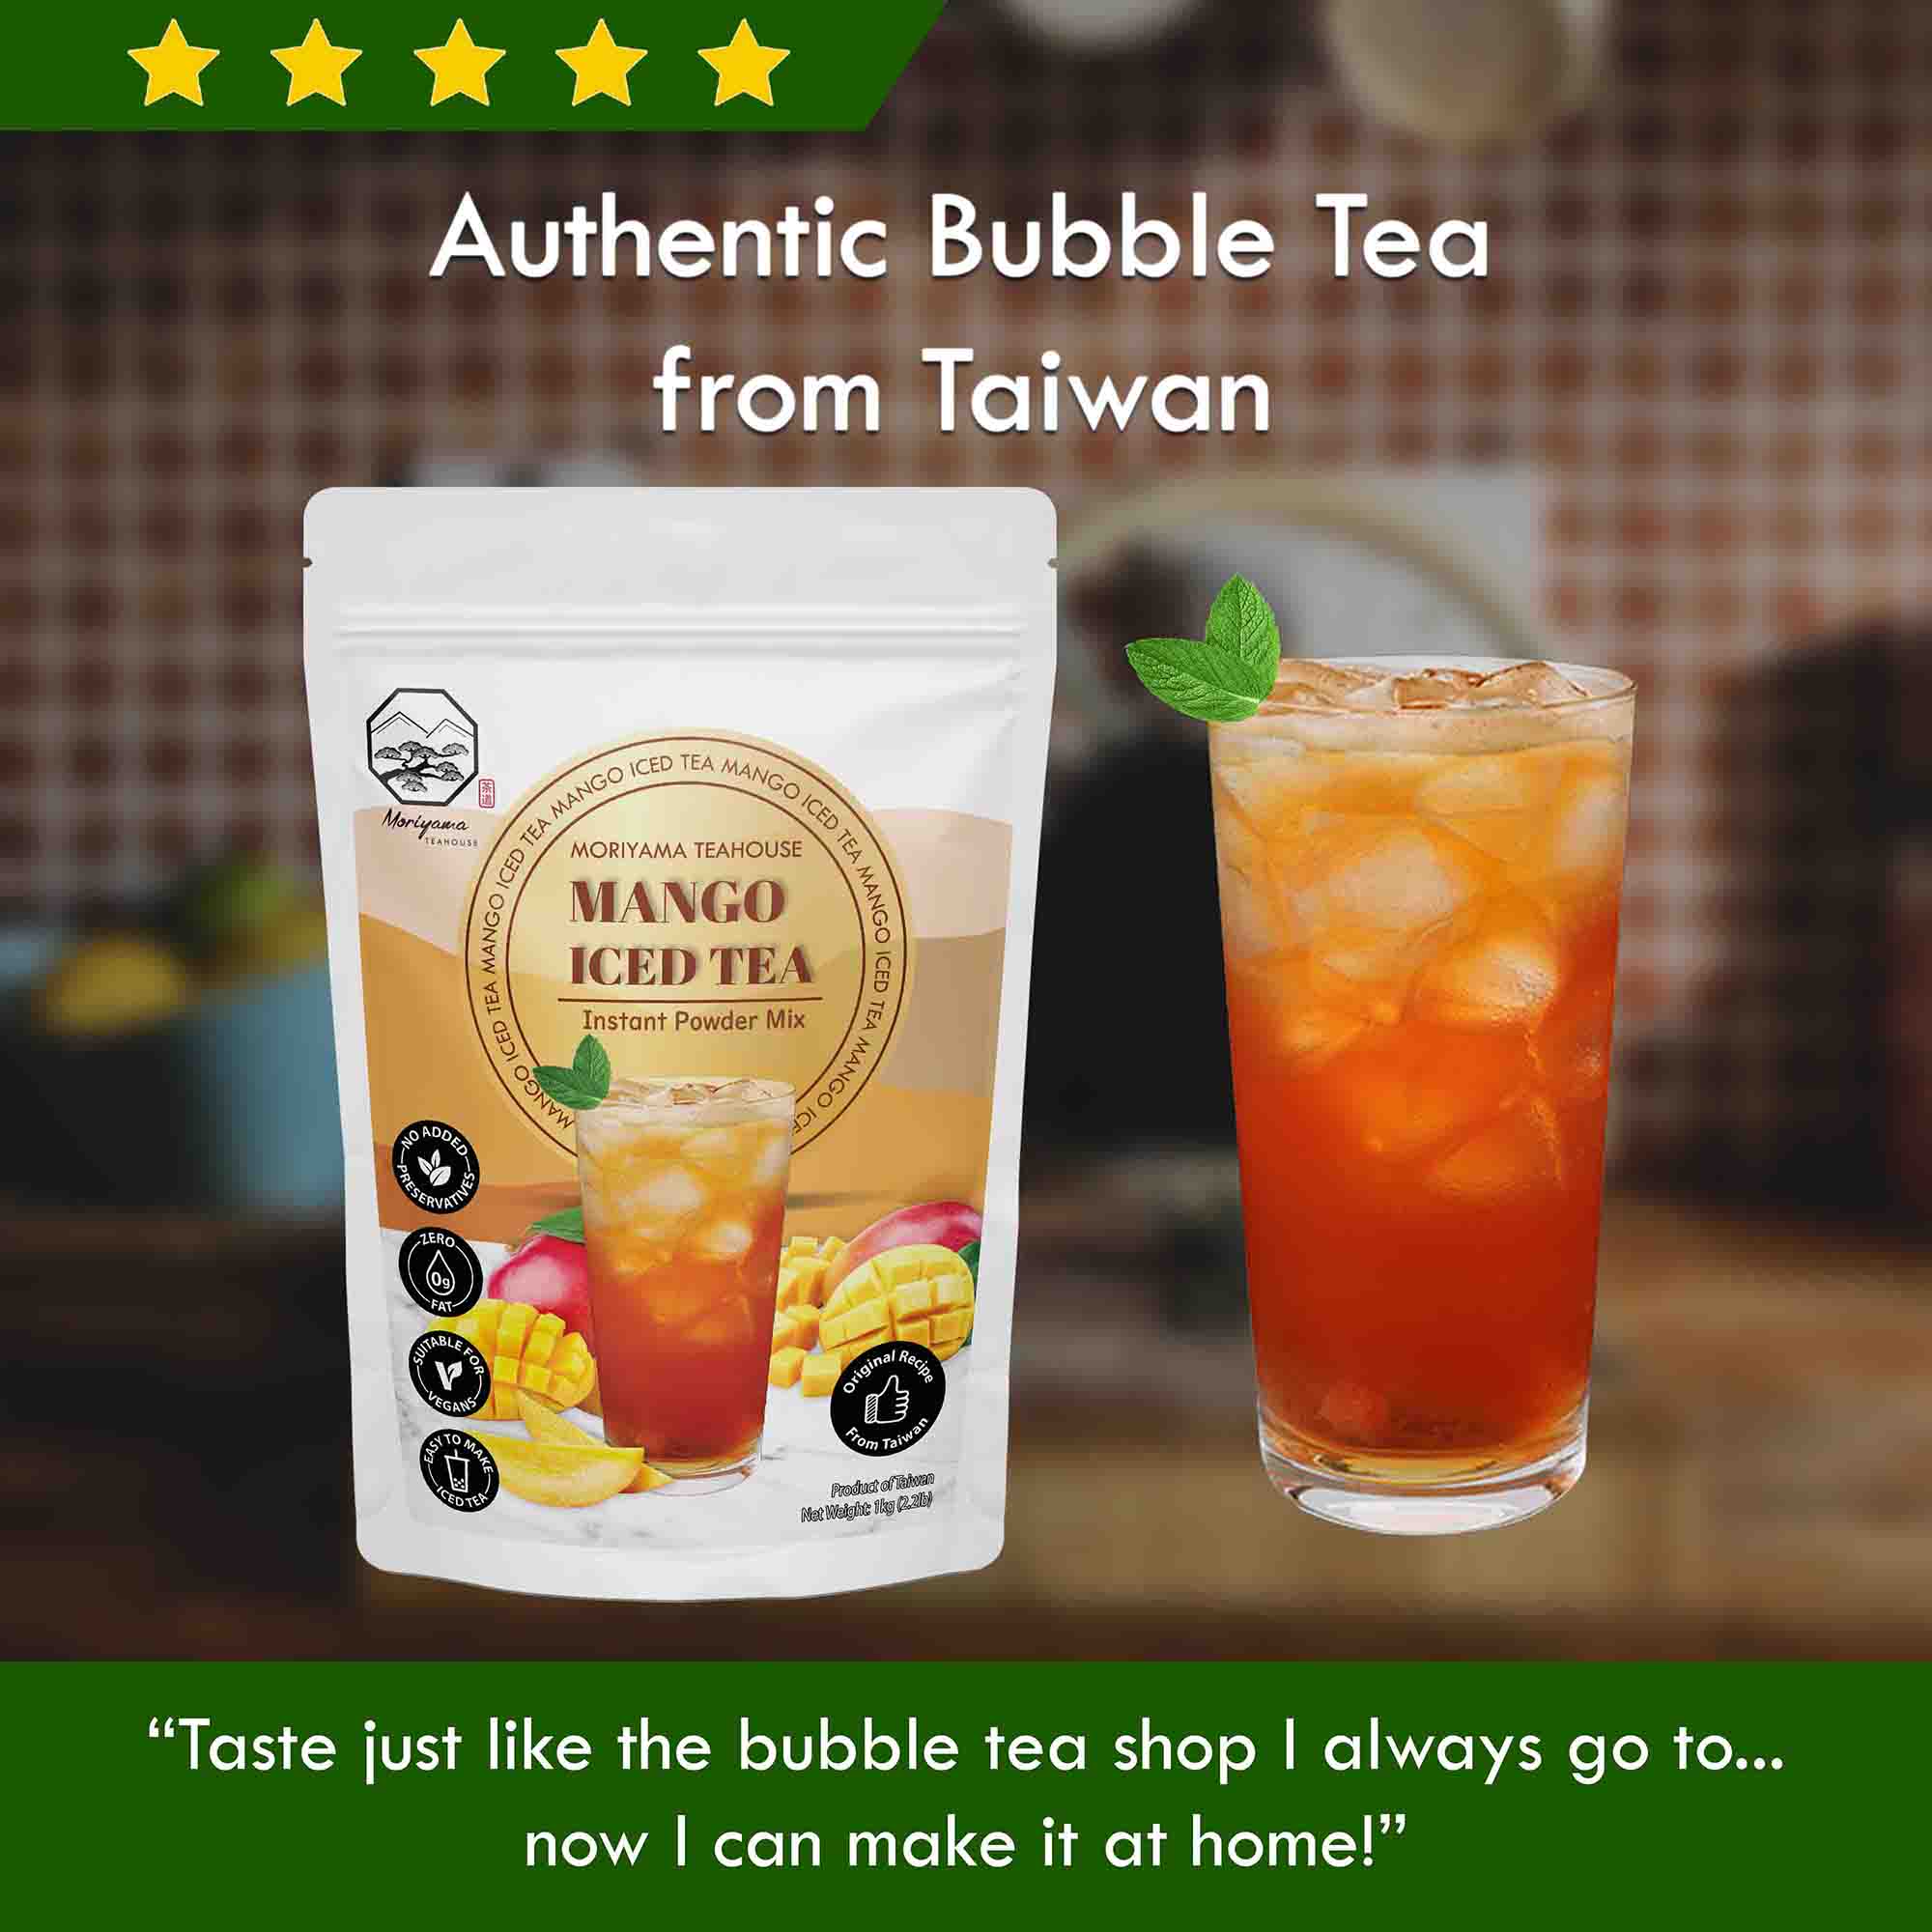 iced tea is of authentic Taiwan recipe